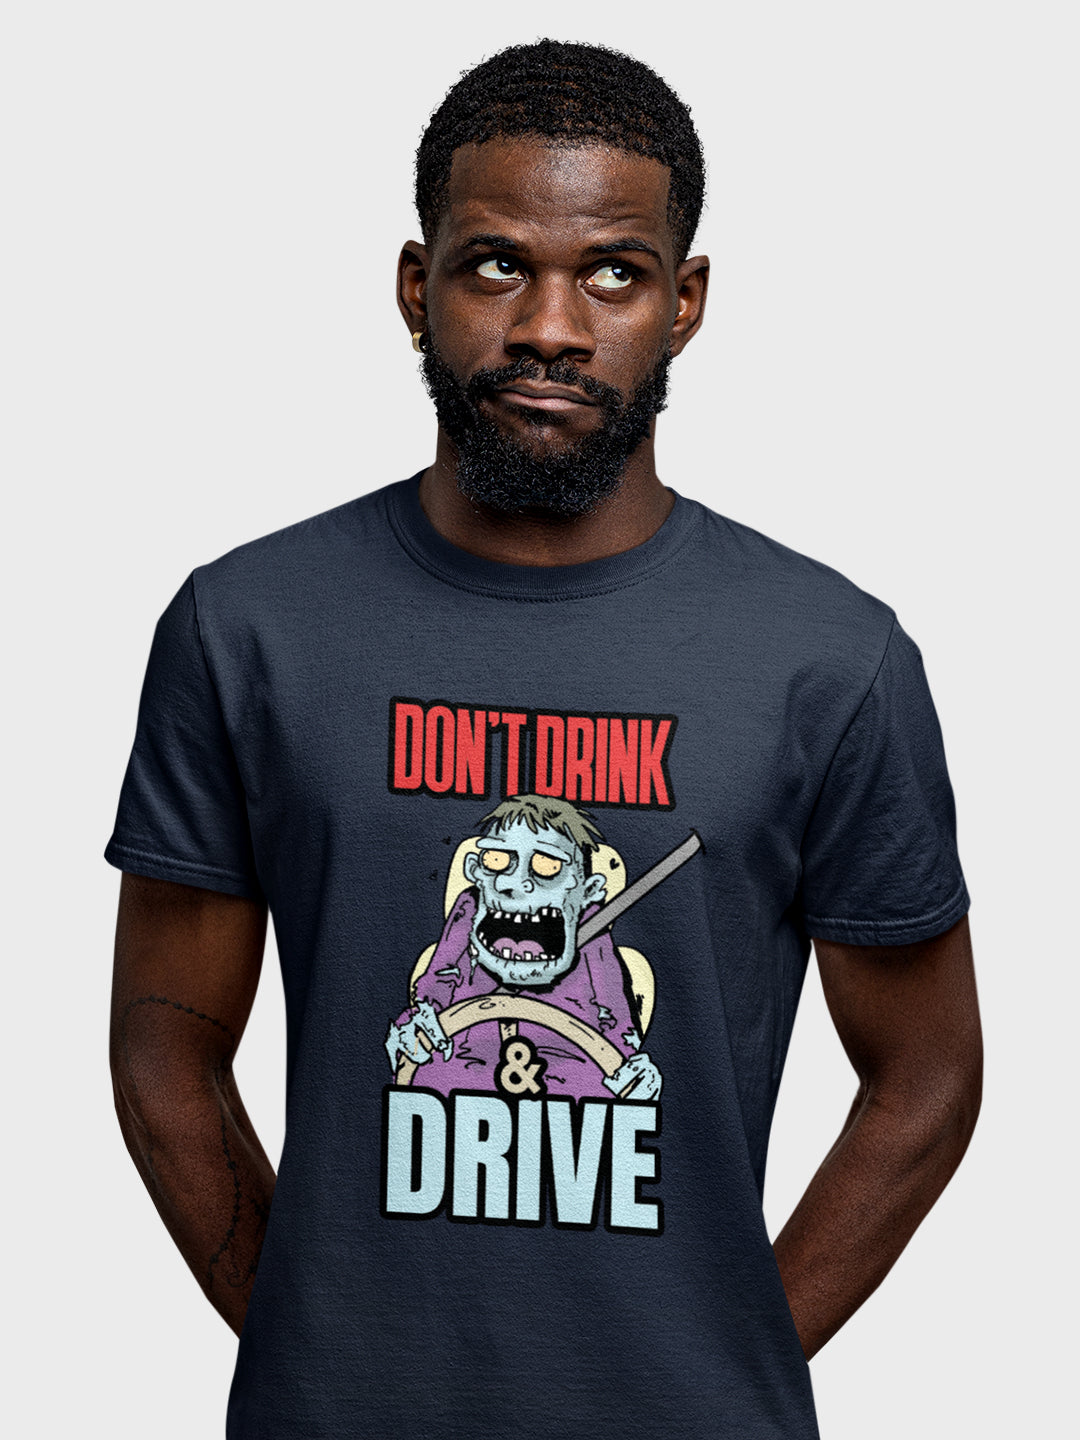 The Zombie Driver T-Shirt